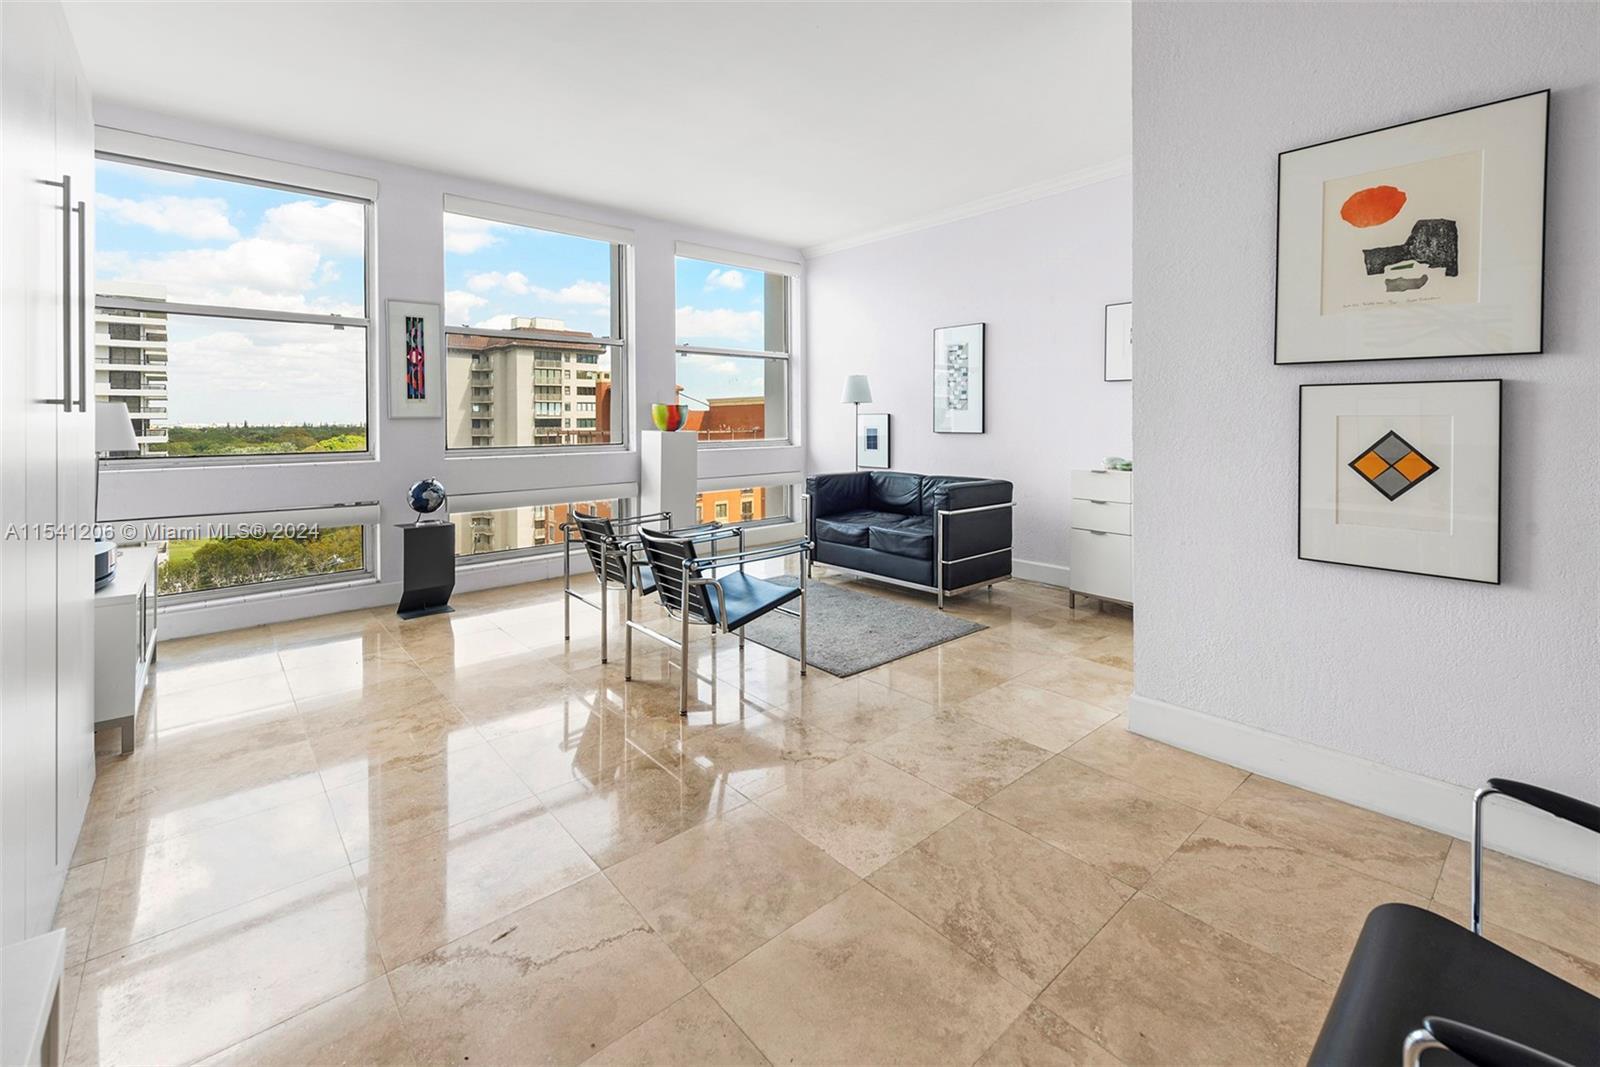 Photo of 700 Biltmore Wy #817 in Coral Gables, FL